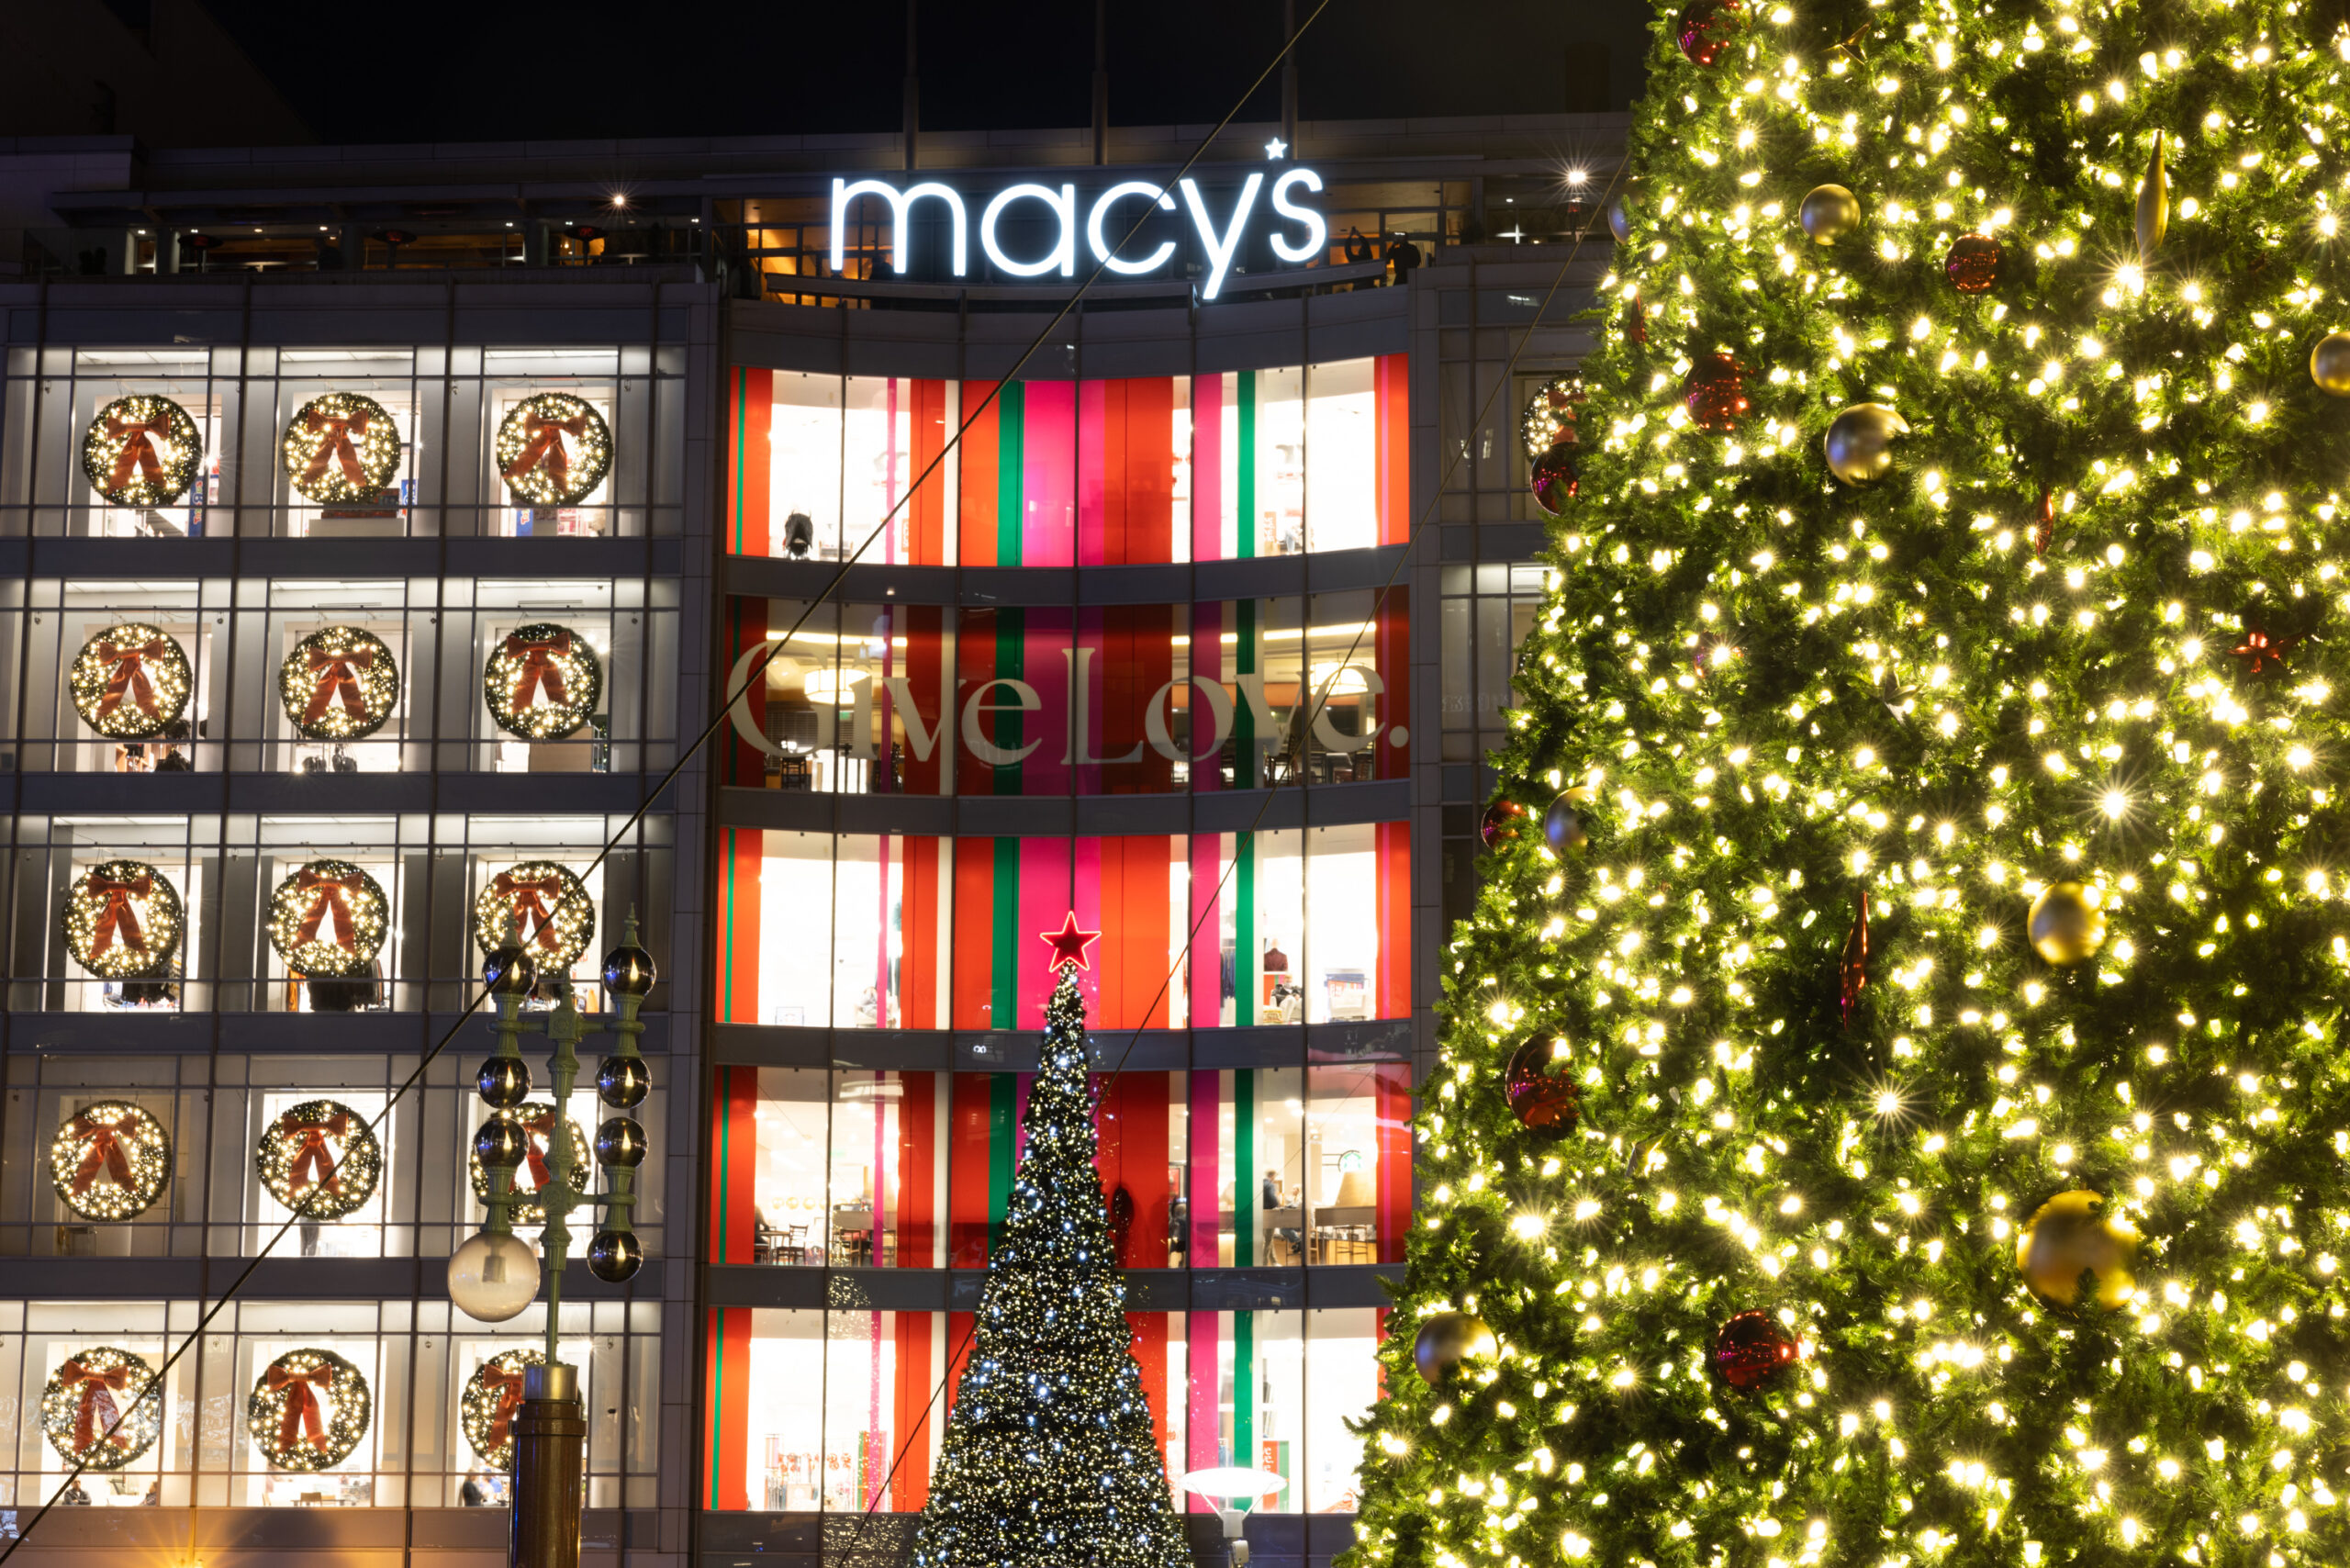 A Christmas tree is lit up in front of the illuminated storefront of Macy's in San Francisco's Union Square. 